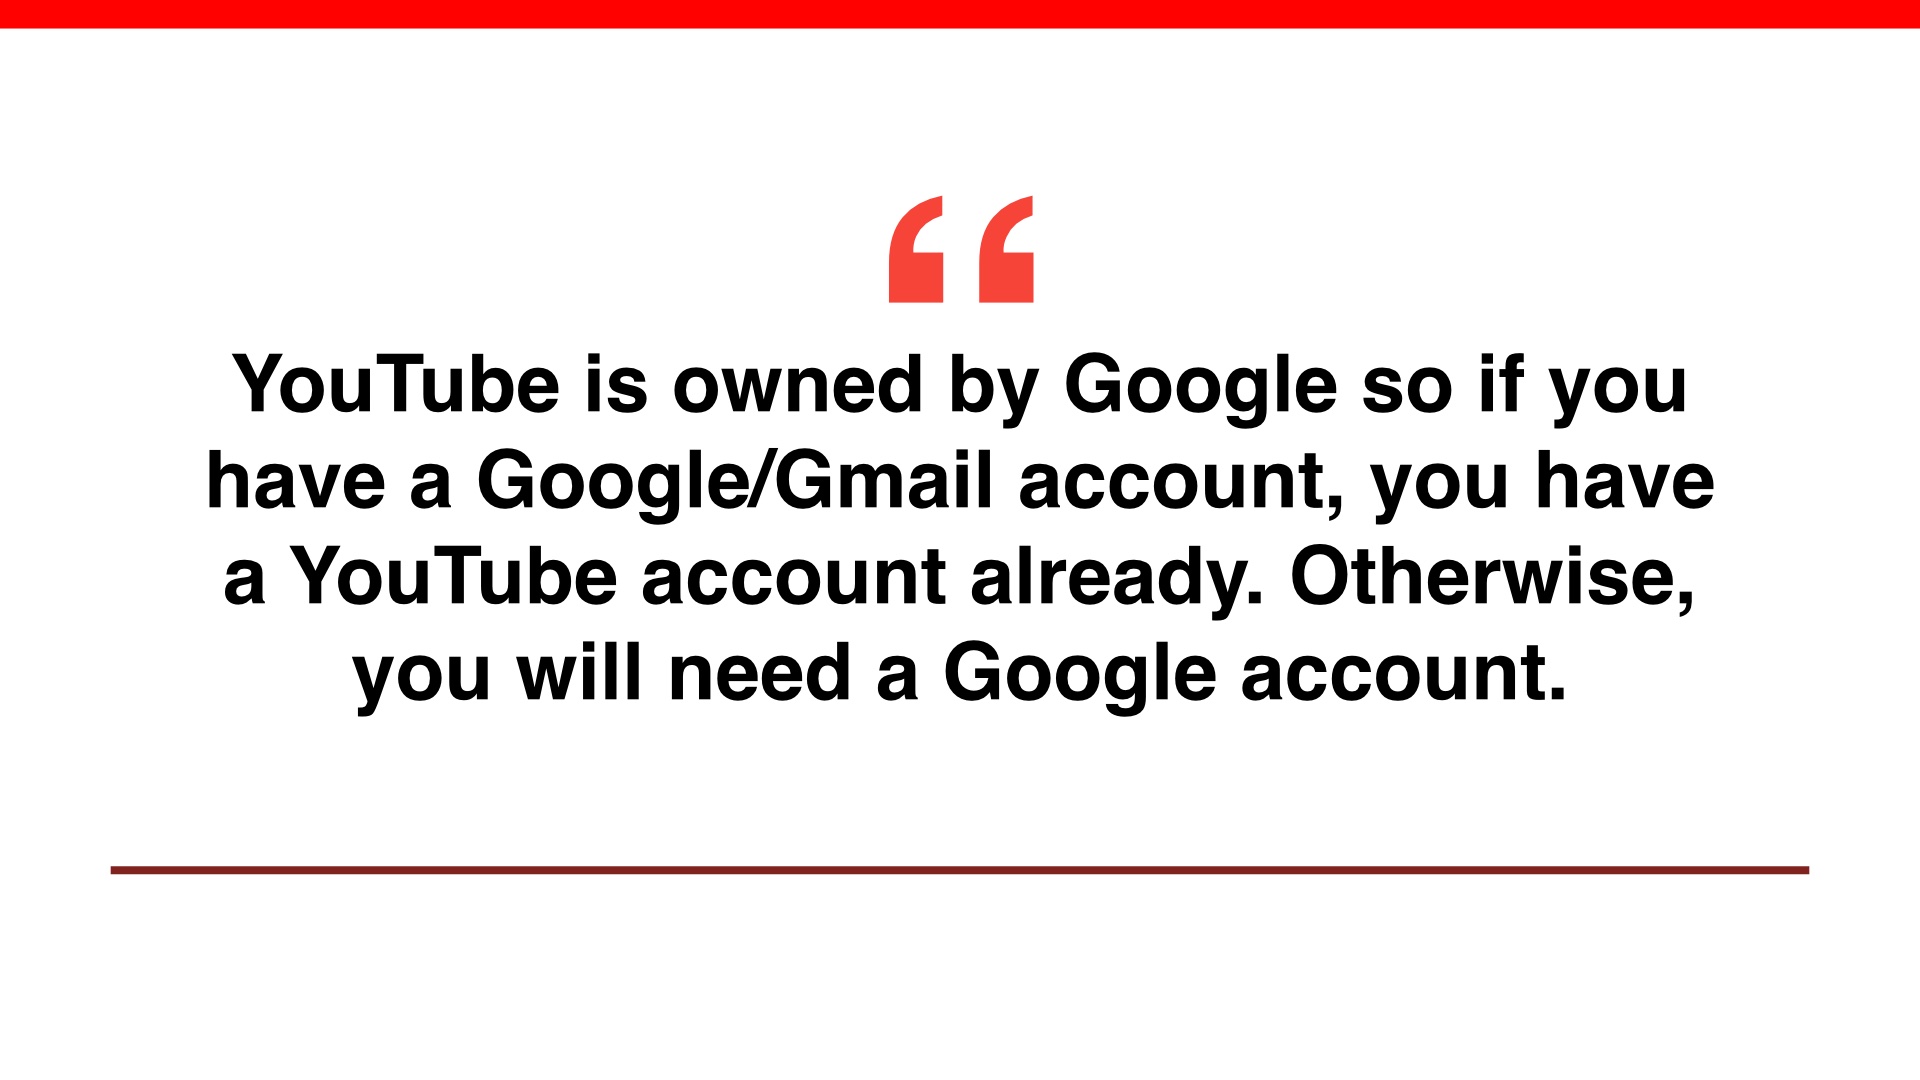 Large quote 'YouTube is owne“d by Google so if you have a Google/Gmail account, you have a YouTube account already. Otherwise, you will need a Google account.'